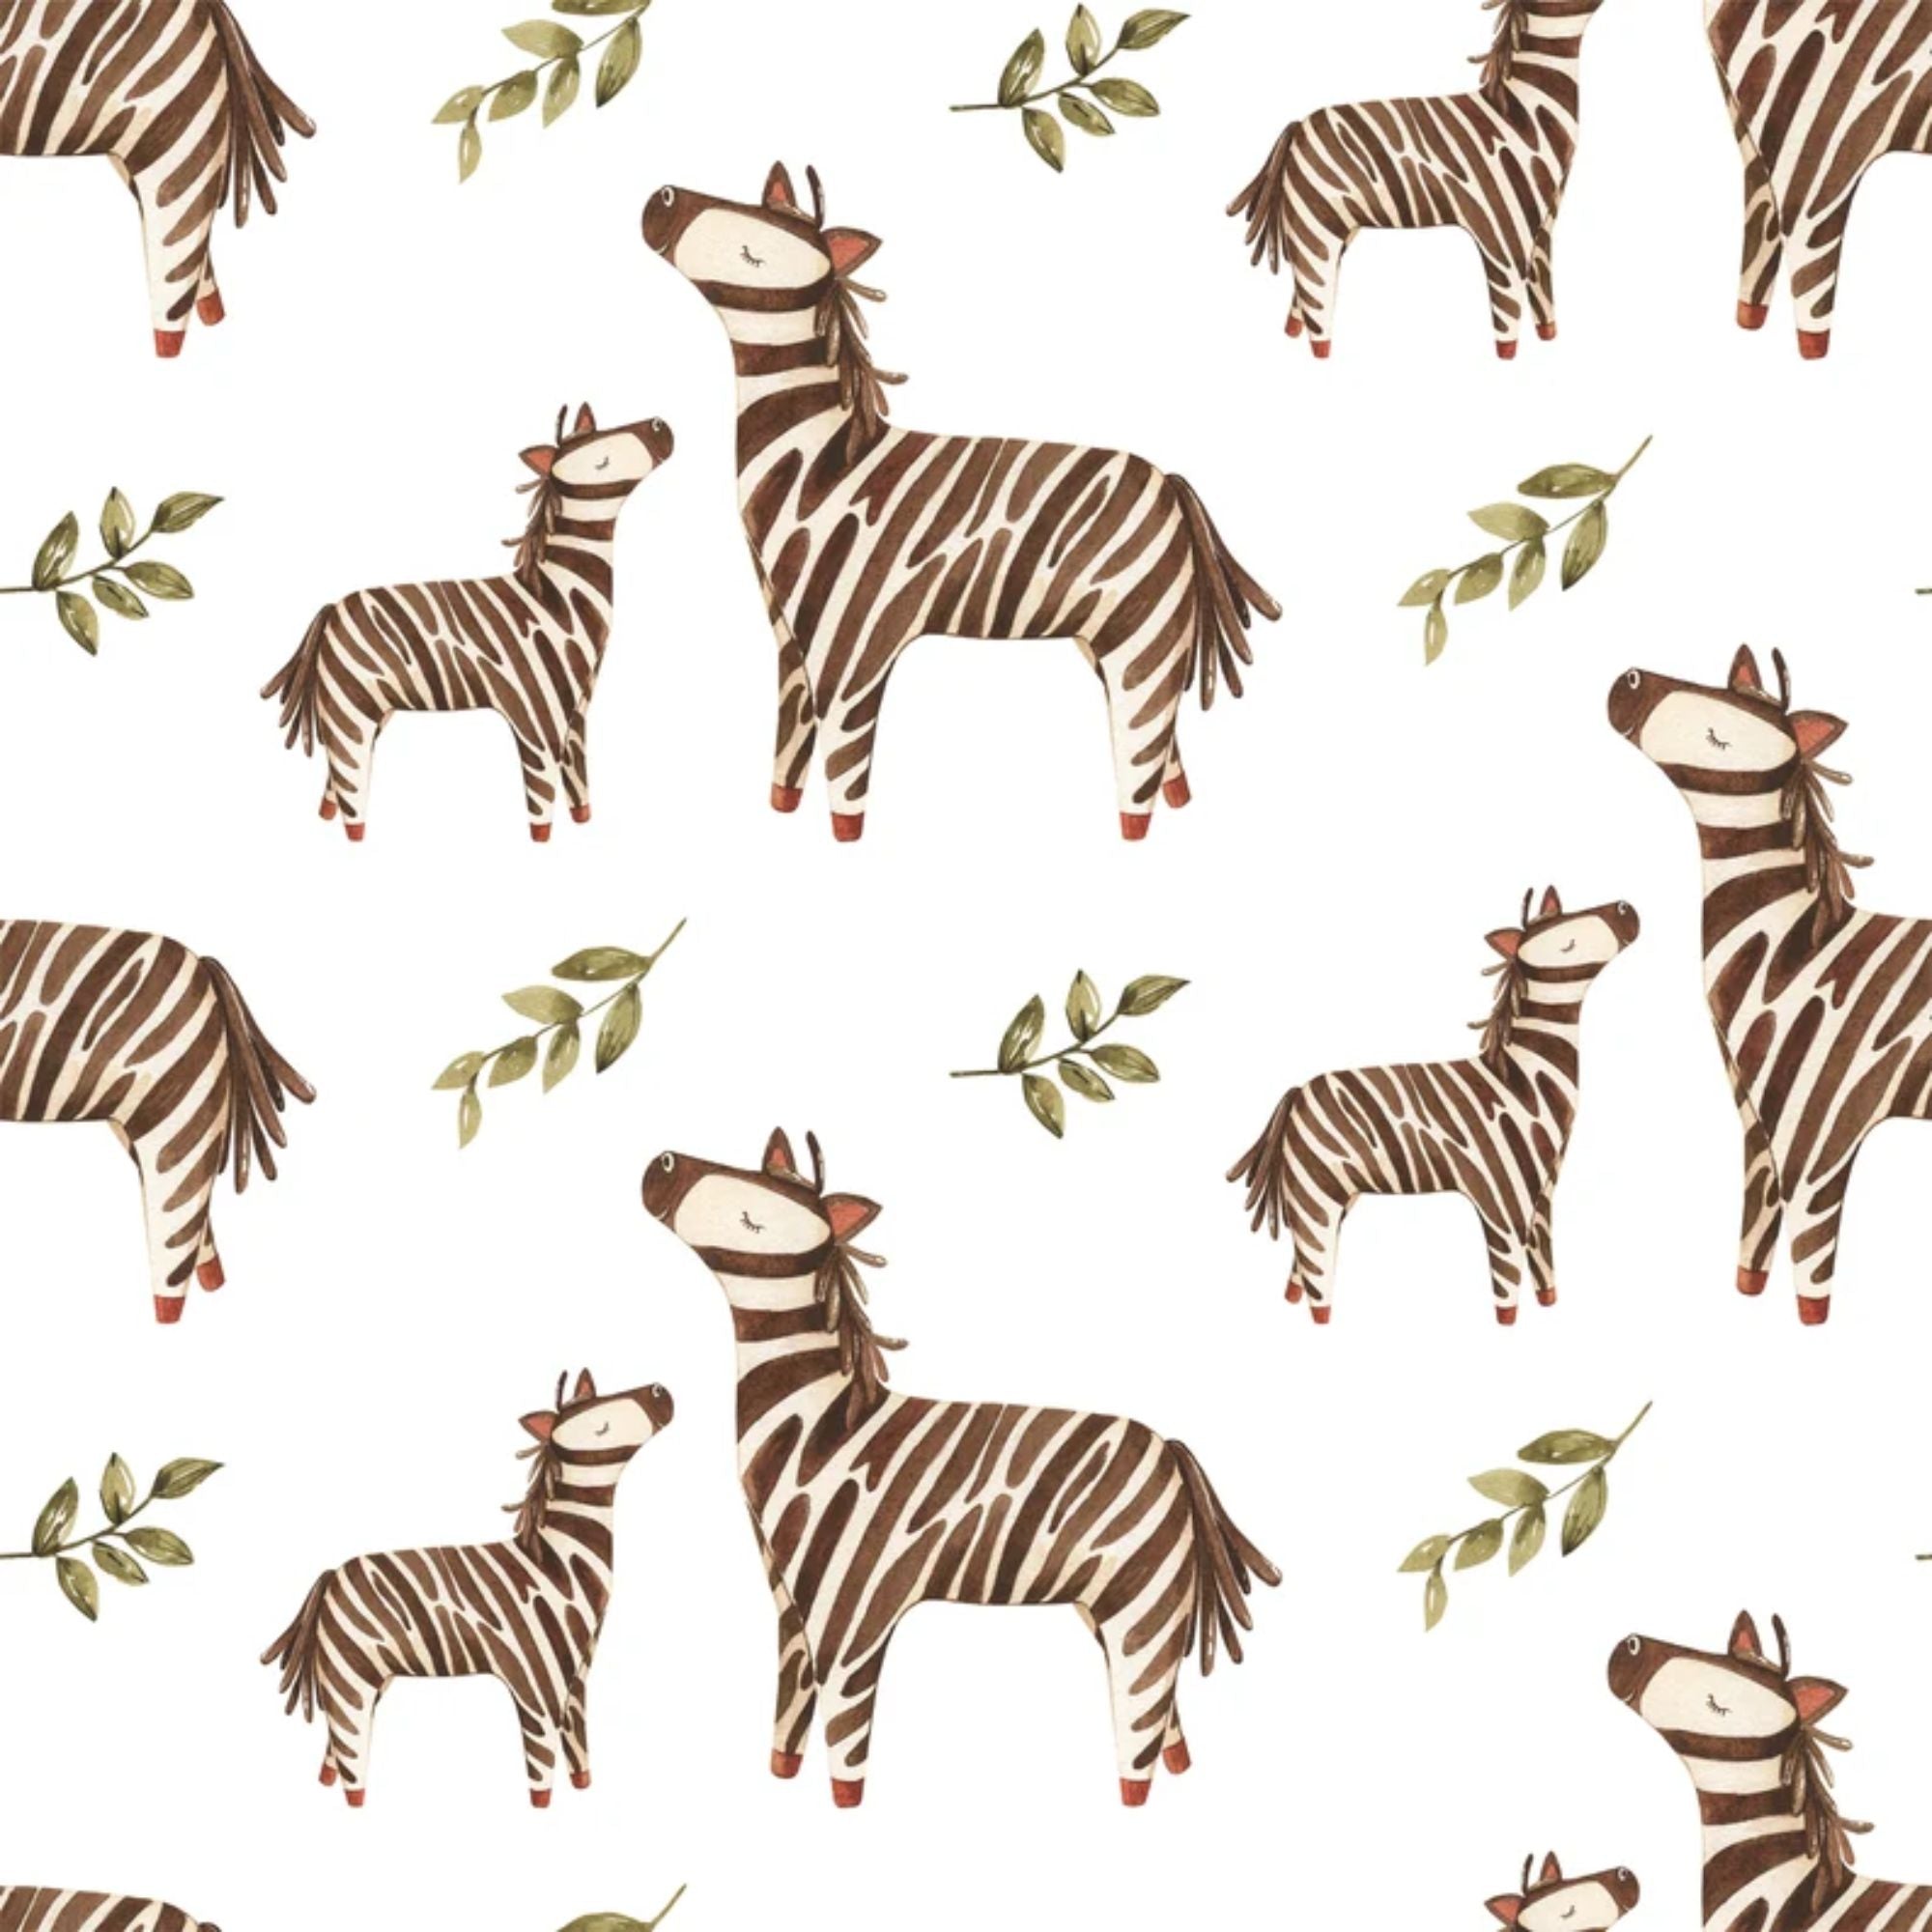 Playful watercolor zebra pattern with green foliage accents for children's room decor